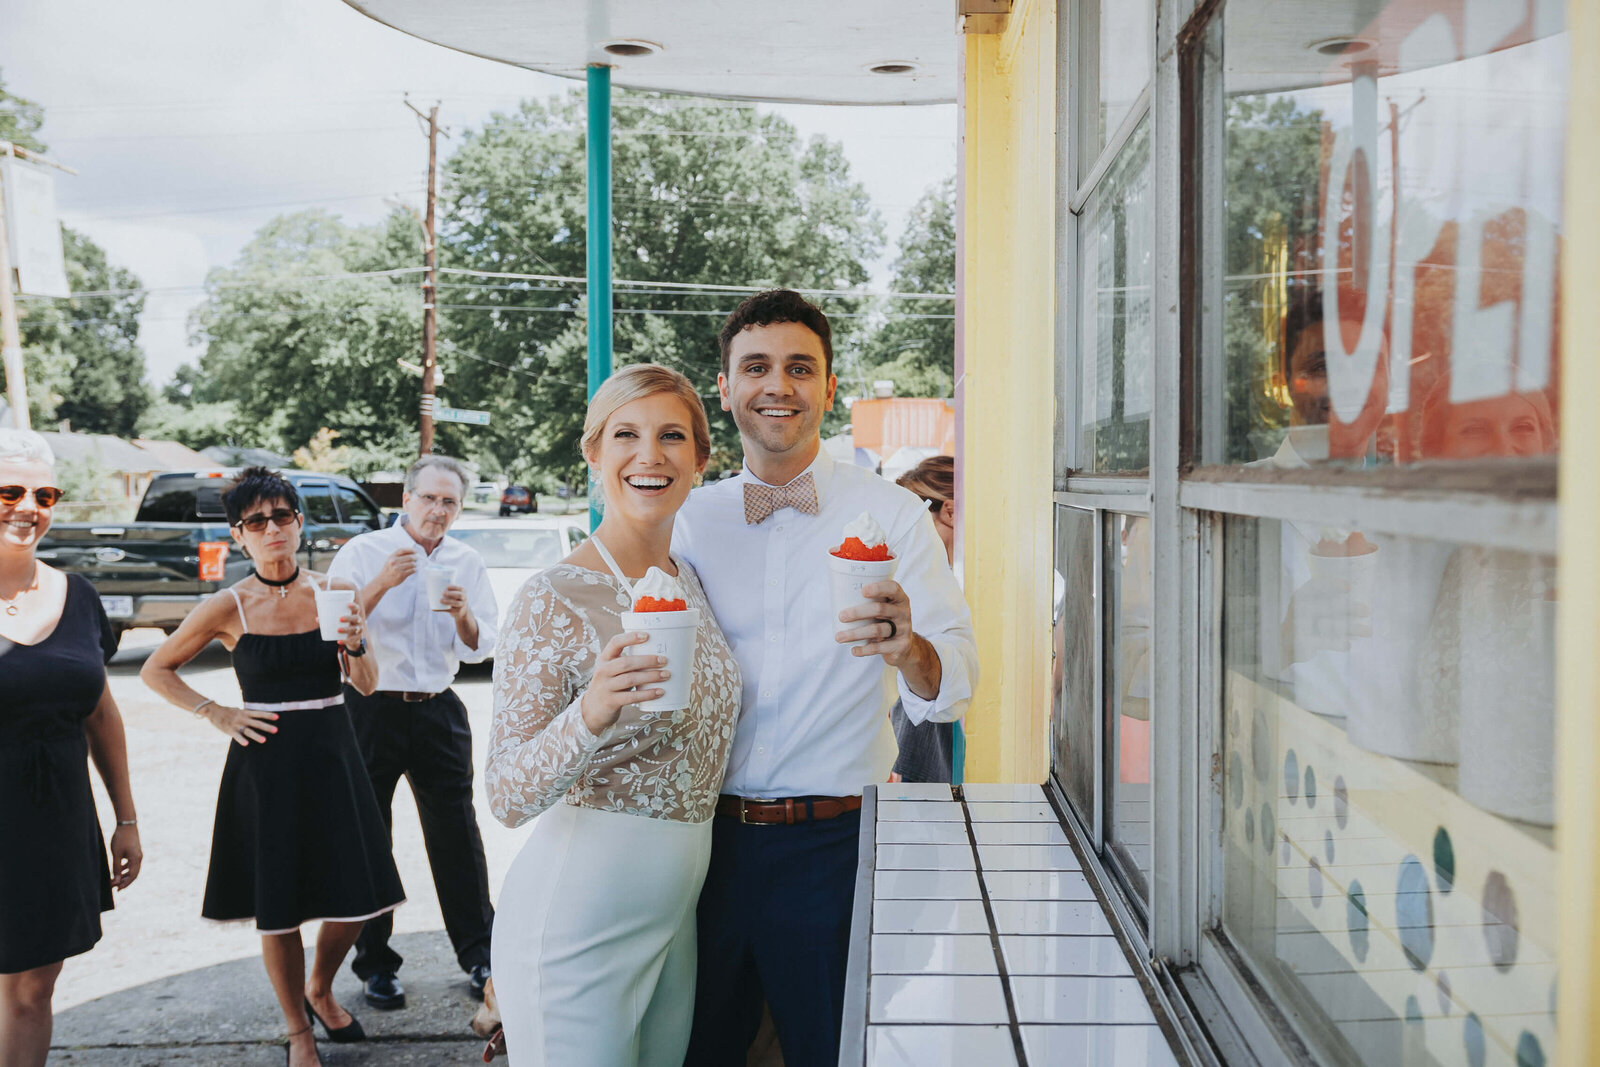 Jerry's Sno Cones for dessert after an intimate wedding